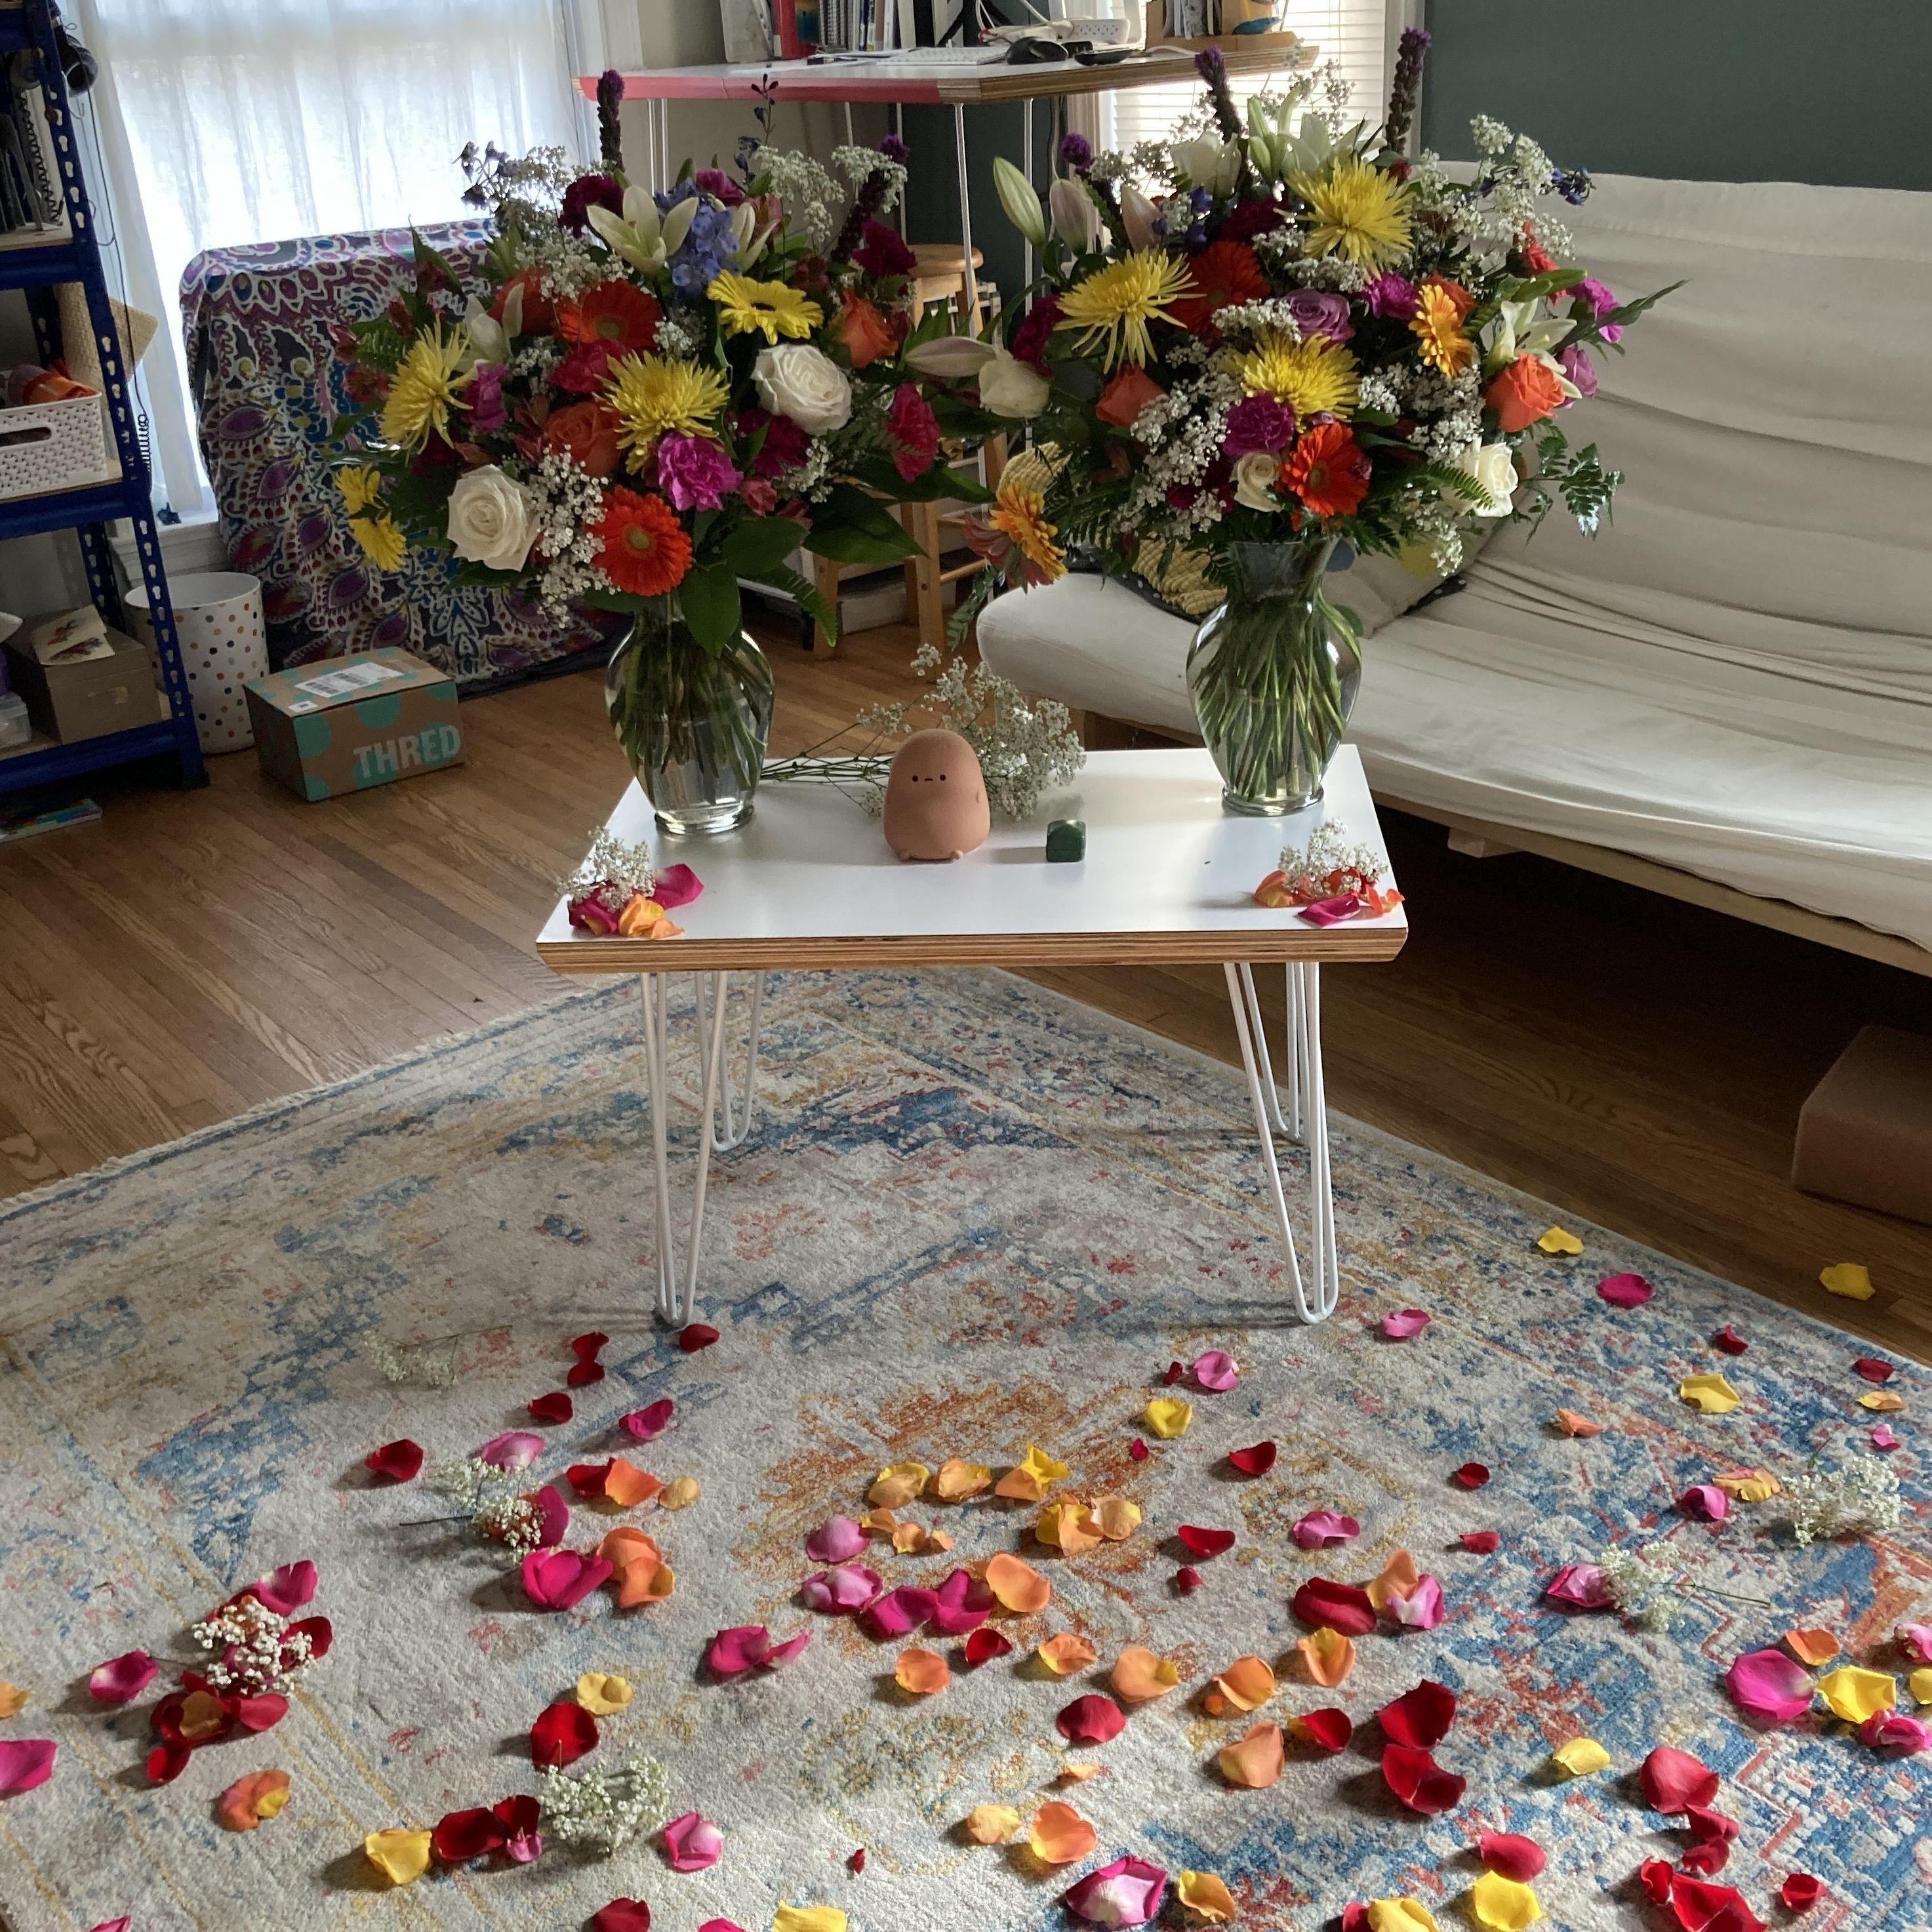 We returned from staycation to find this surprise! Our friend Matt set it all up beautifully––rose petals and all. Thank you Matt!